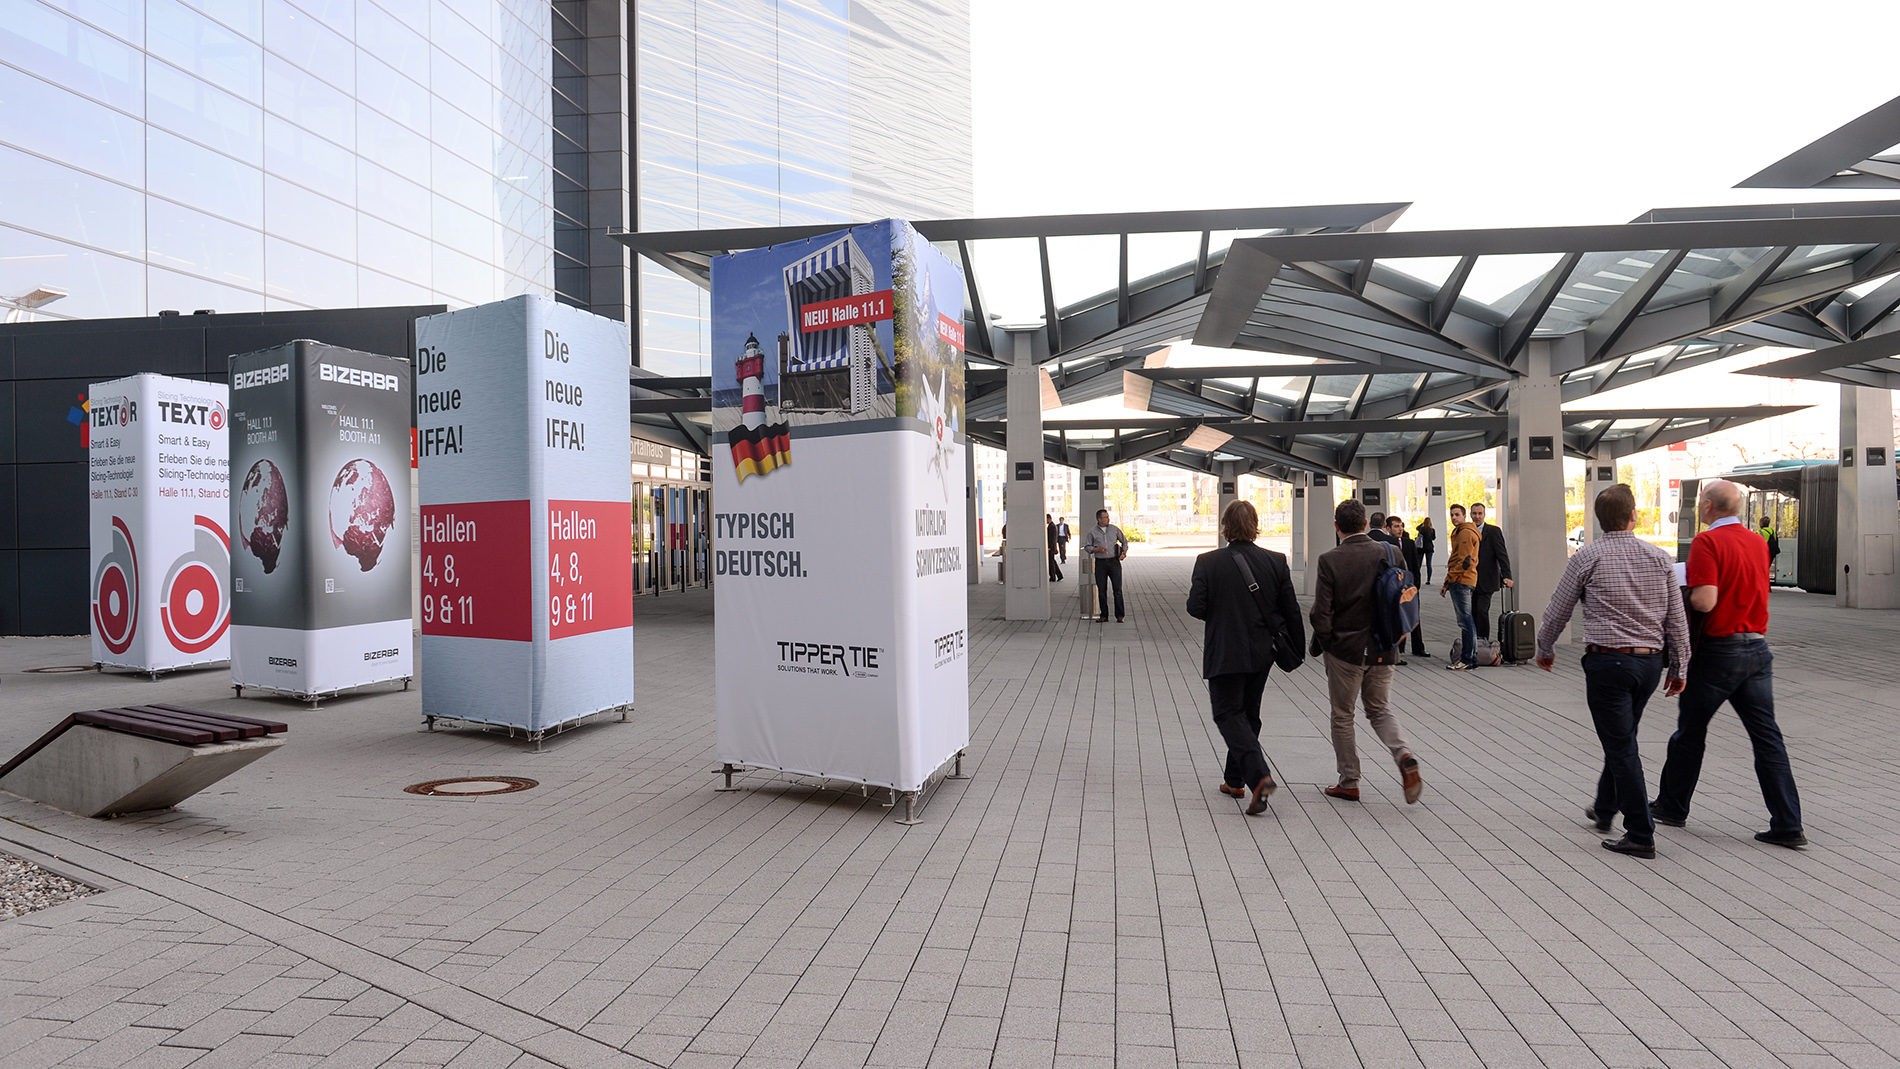 Advertising on the outside of Messe Frankfurt: advertising towers in front of the entrance